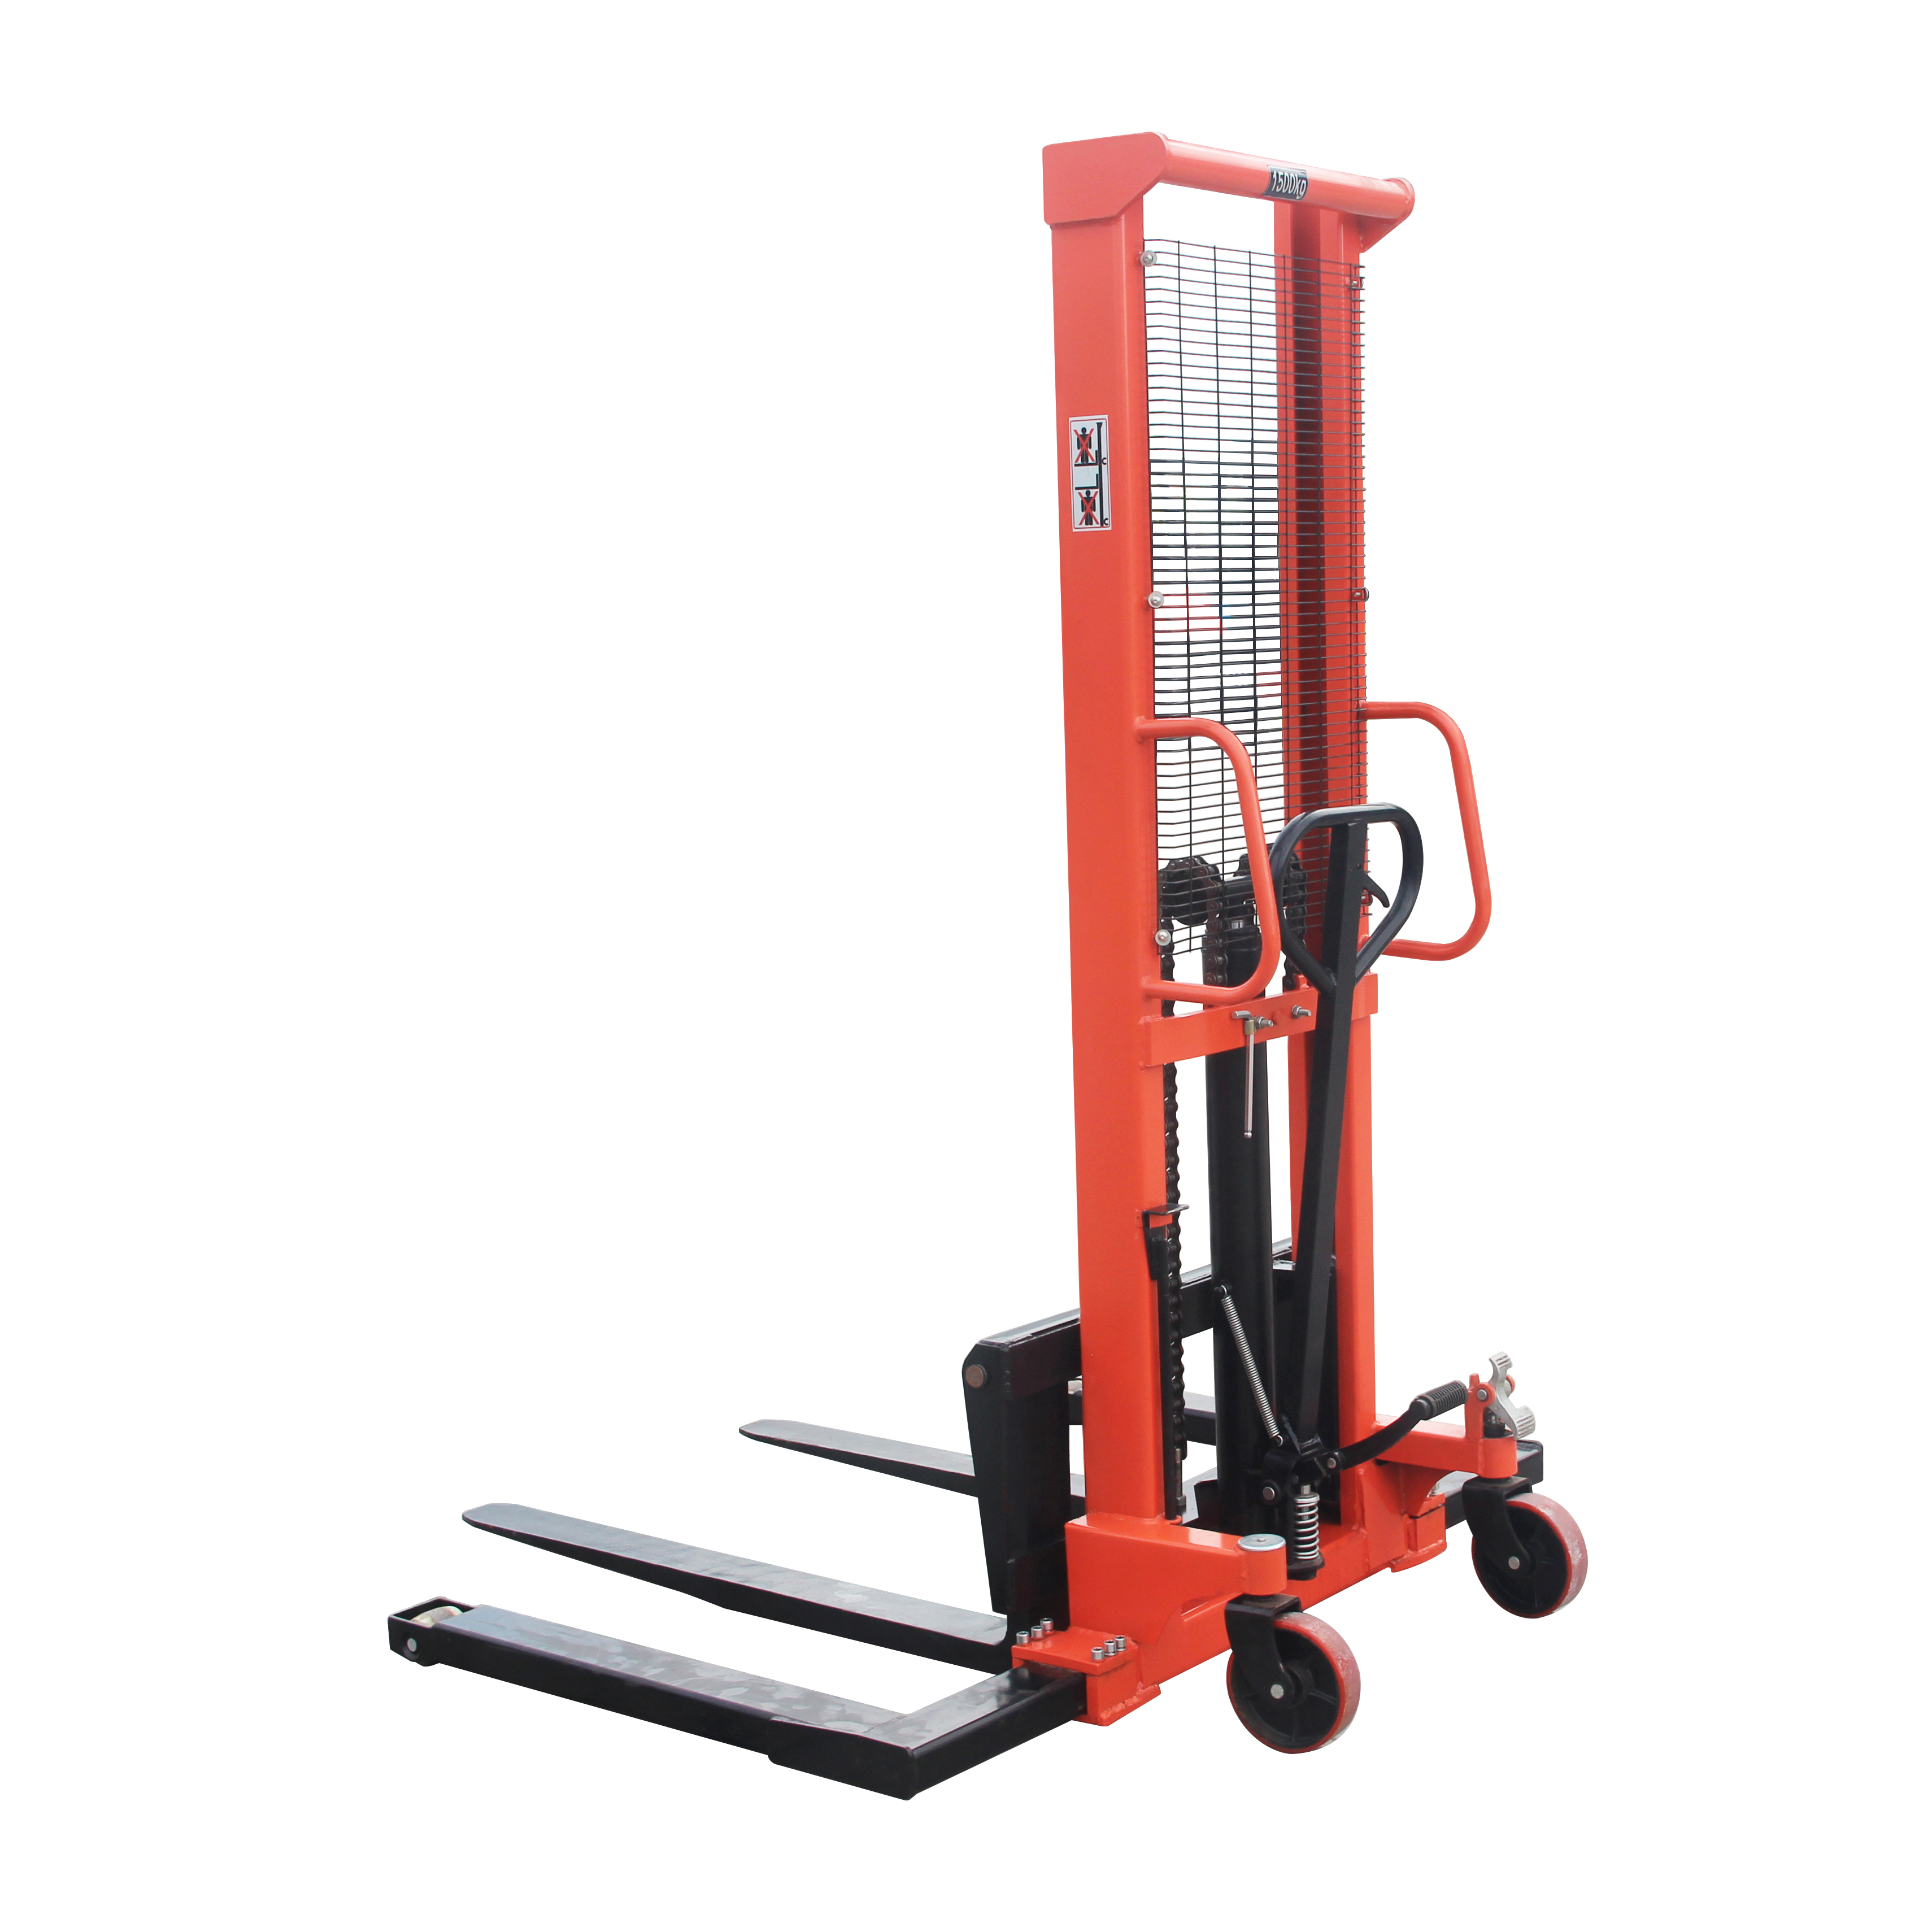 NIULI Hand Pallet Lifter Stacker Forklift Hydraulic Wide Straddle Manual Stacker with Adjustable Leg